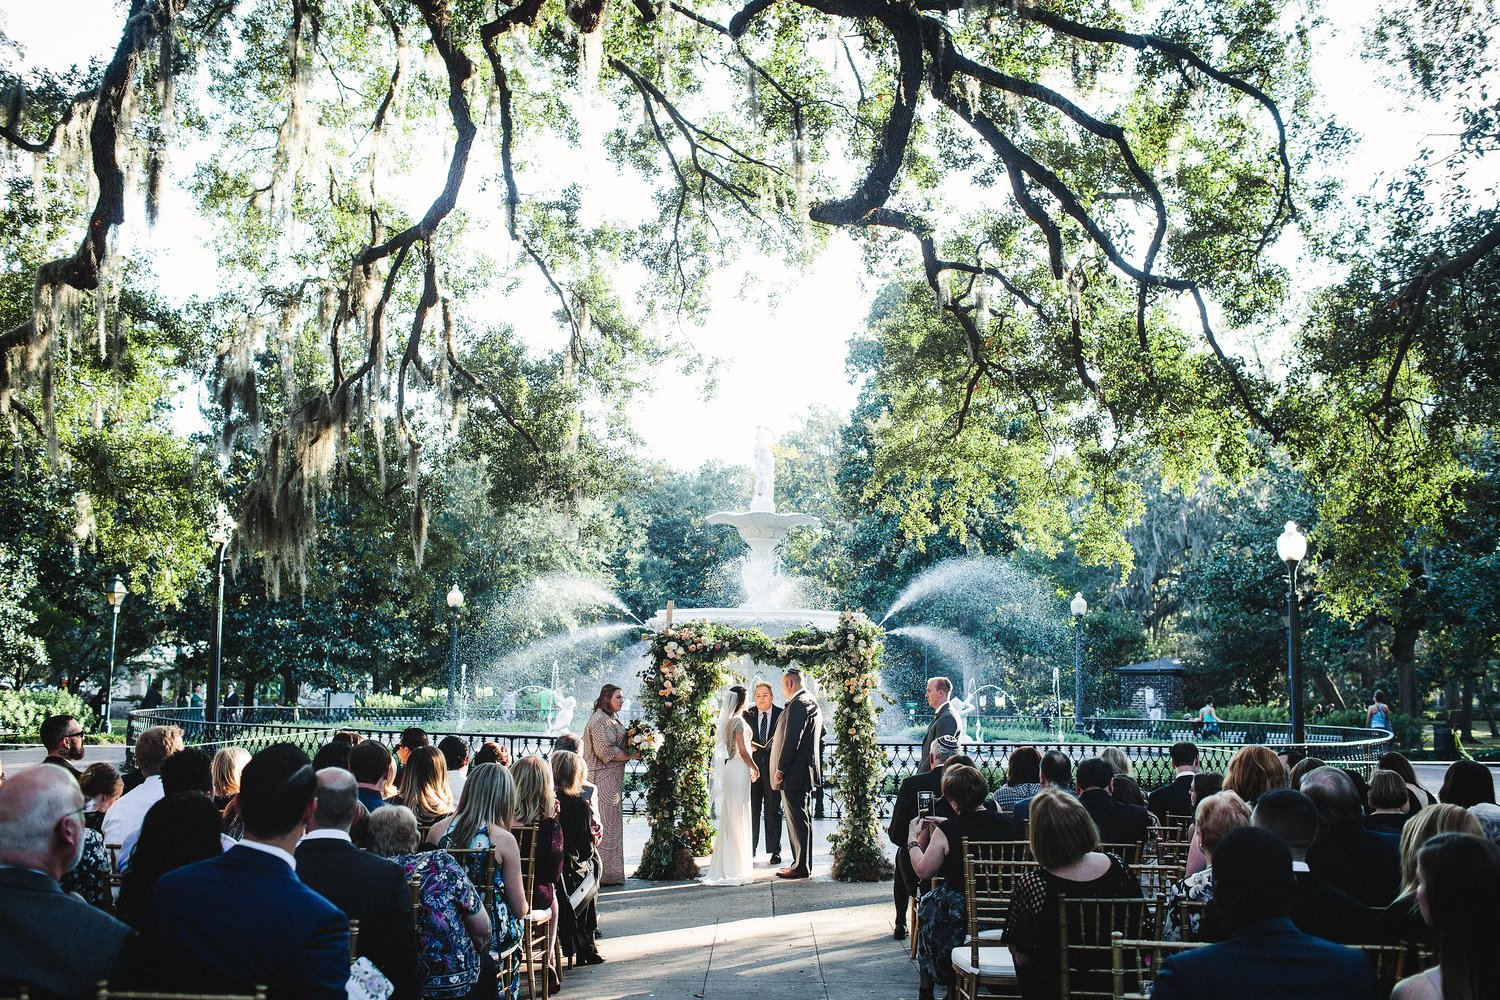 izzy-hudgins-photography-savannah-wedding-ivory-and-beau-bridal-boutique-savannah-wedding-planner-colonial-house-of-flowers-forsyth-park-wedding-old-fort-jackson-wedding-squidwed-films-savannah-boutique-savannah-weddings-31.jpg